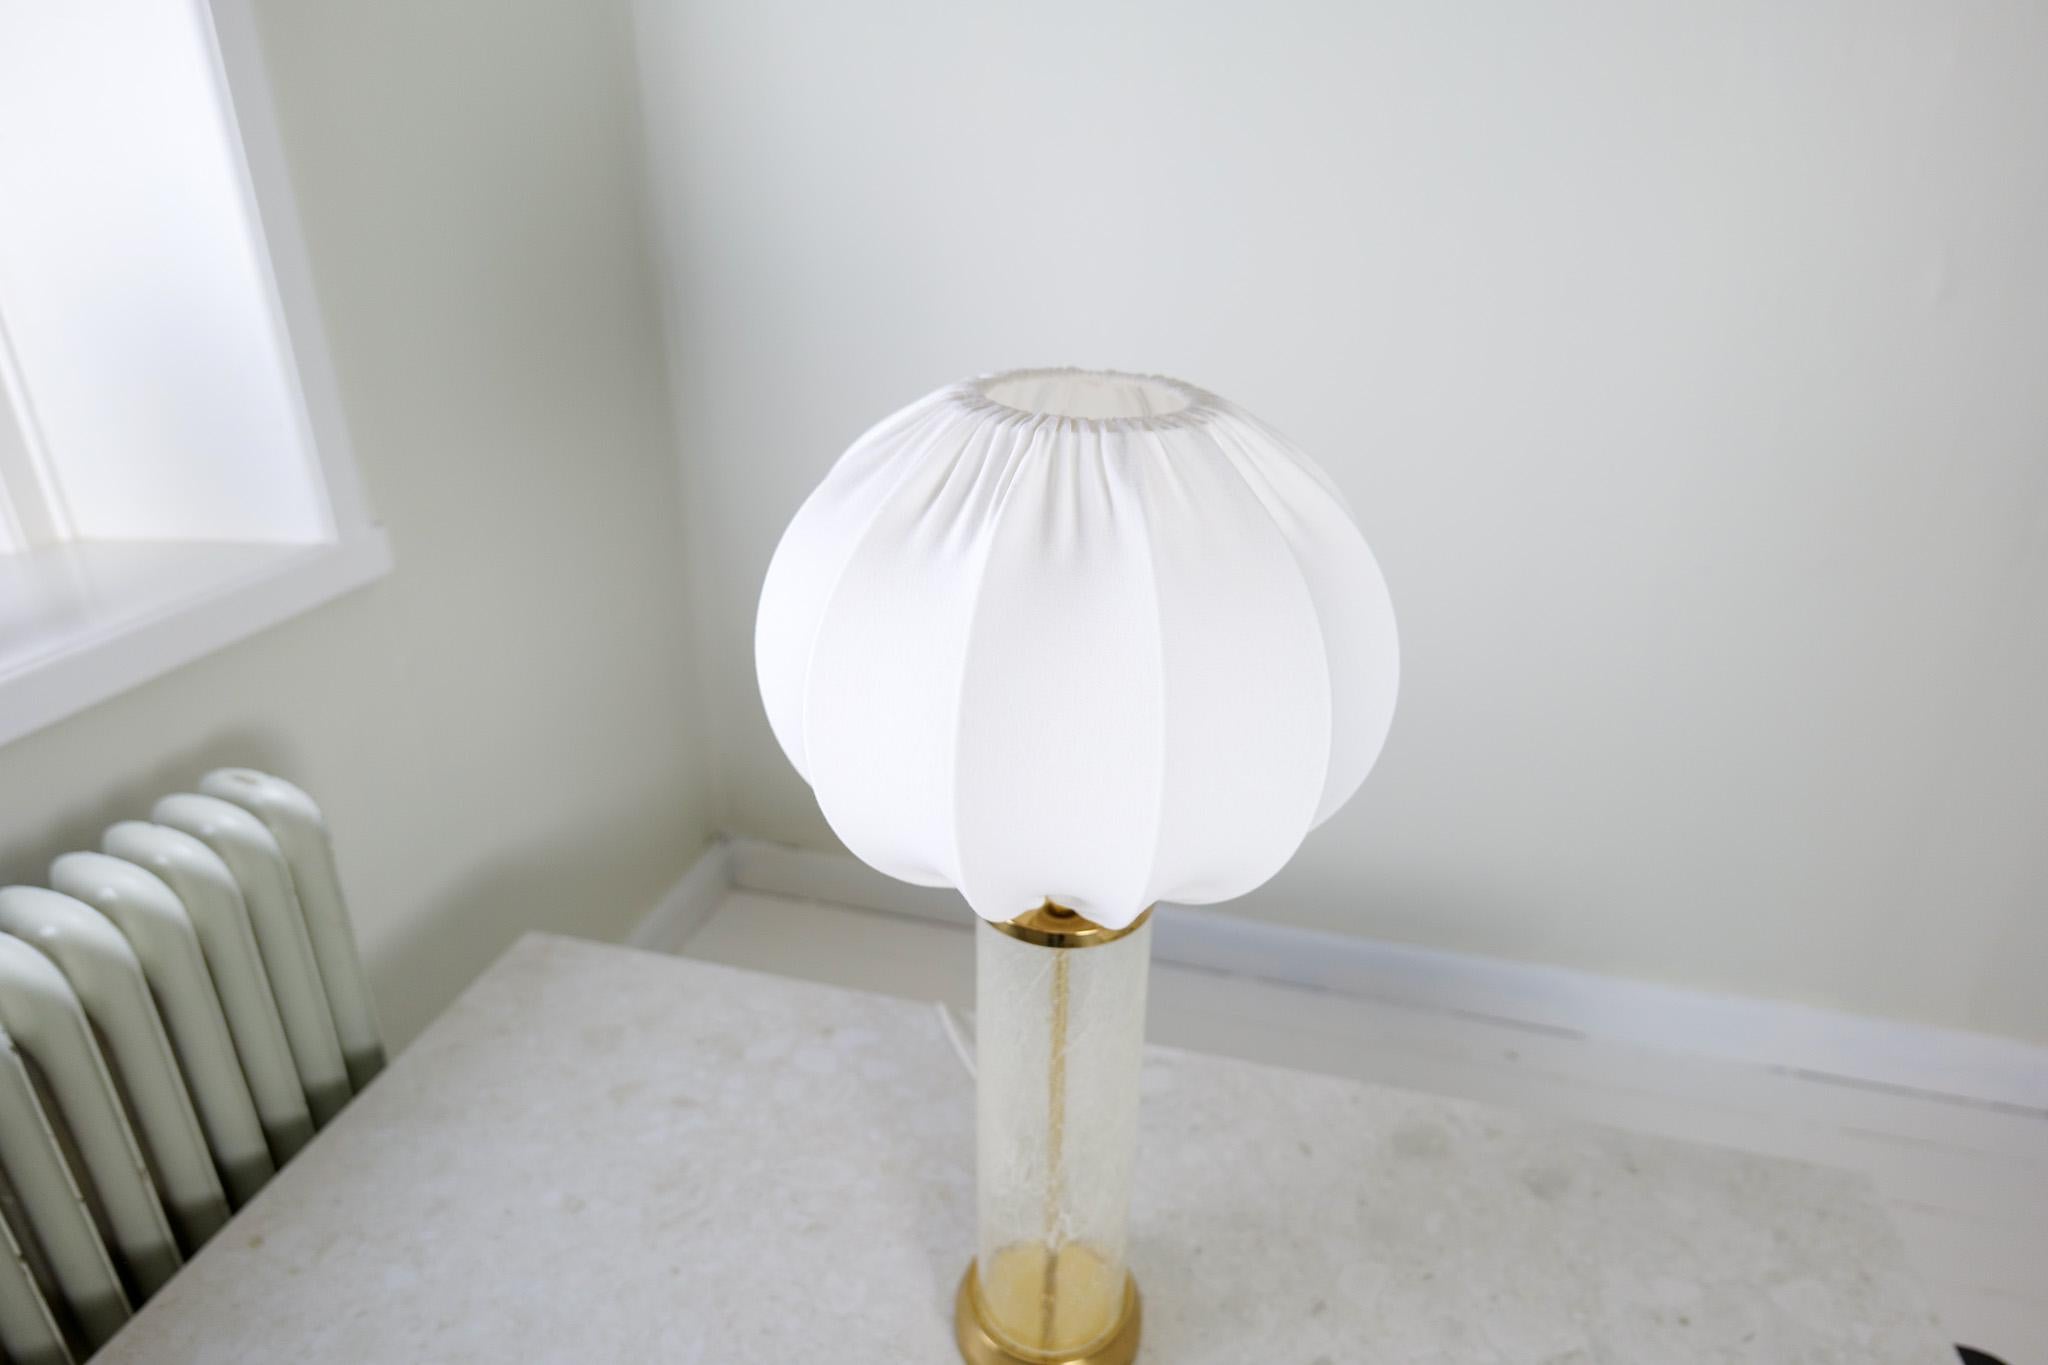 Midcentury Modern Glass and Brass Table Lamp Bergbom B-019 Sweden 1960s For Sale 4